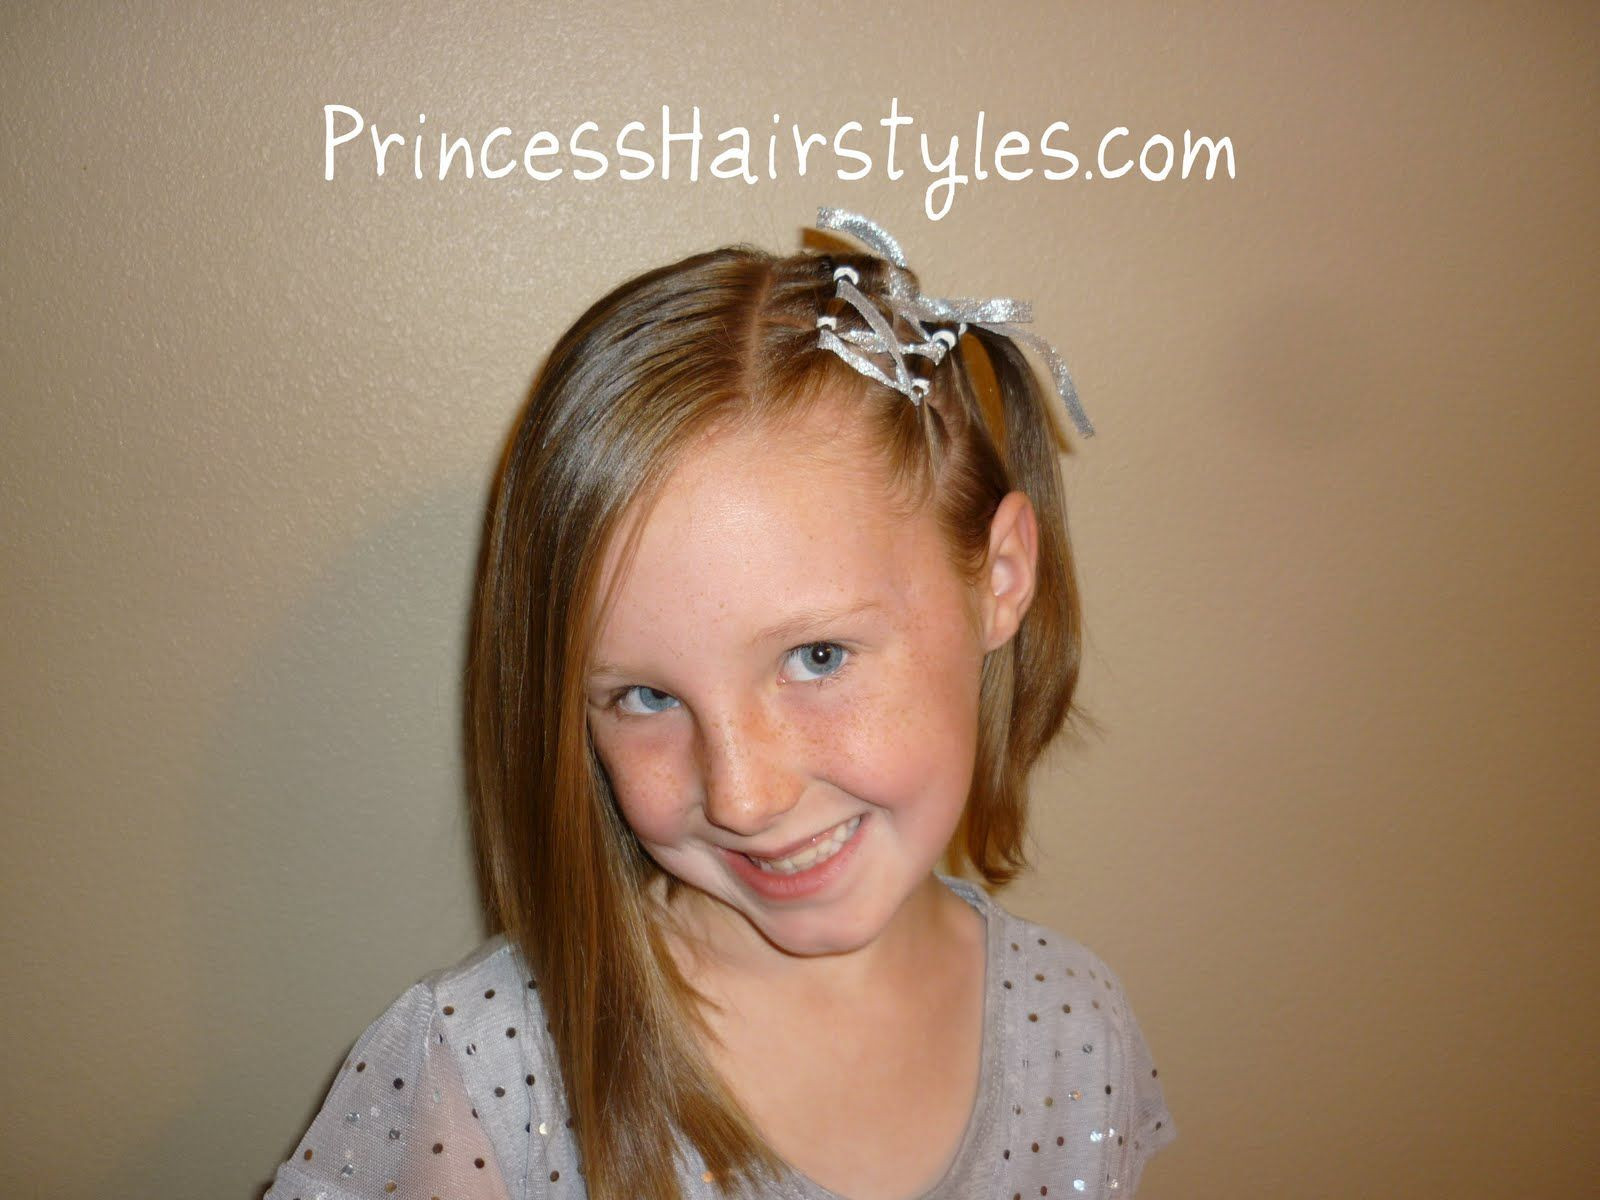 12 Years Old Girl Hairstyles
 TOP 10 hairstyles for 12 year old girls